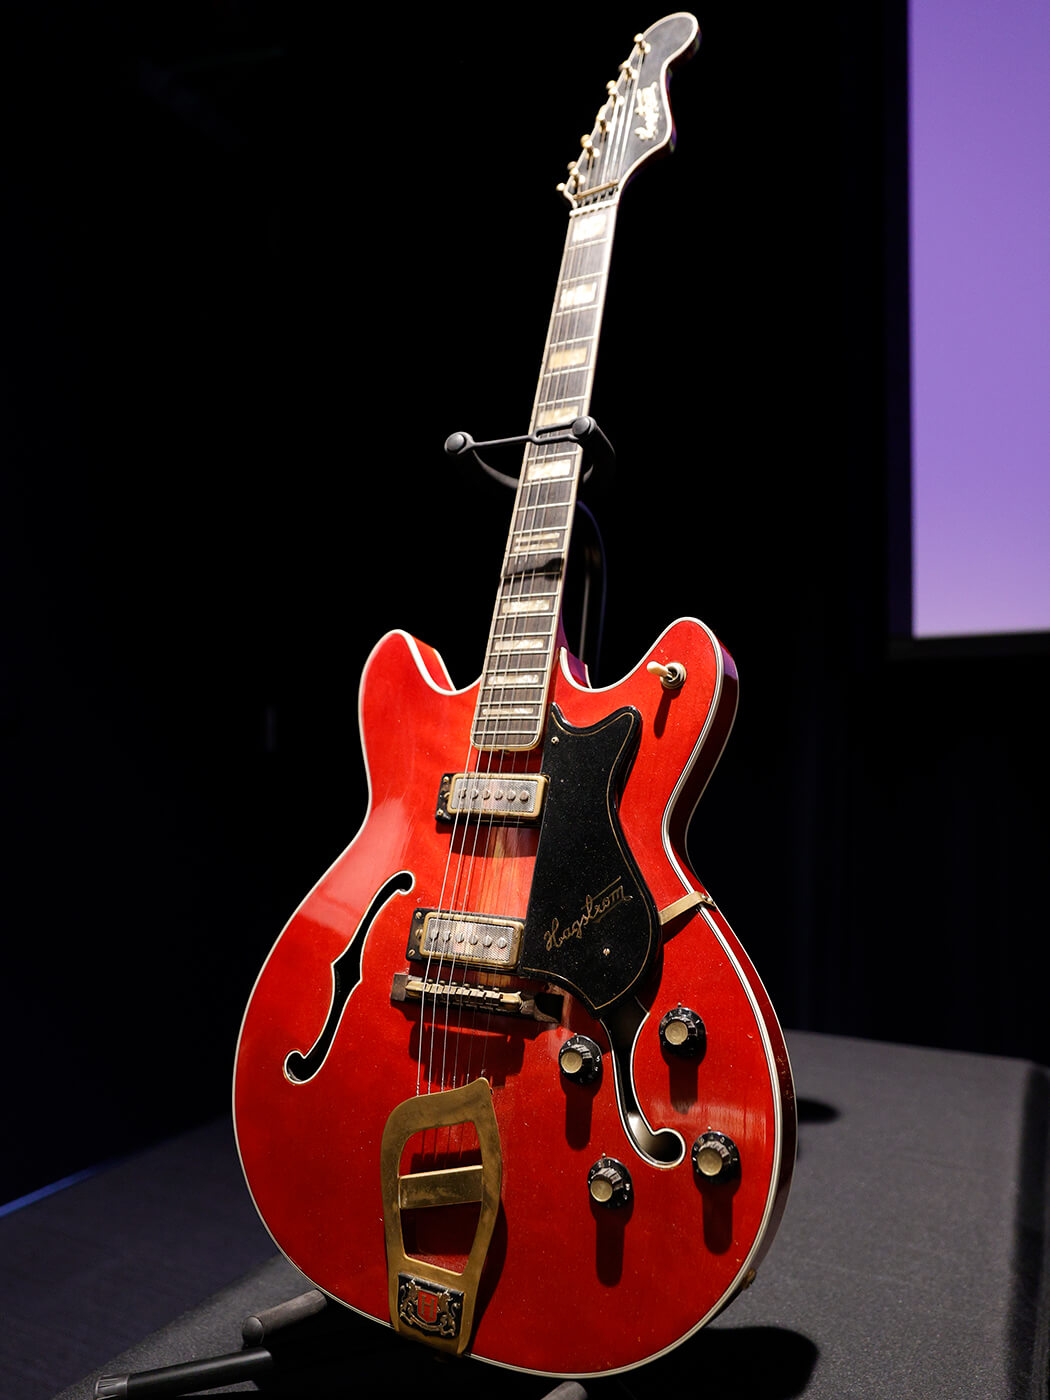 Elvis Presley’s 1968 Comeback Special Cherry Red Hagstrom Viking II, photo by Jason Kempin/Getty Images